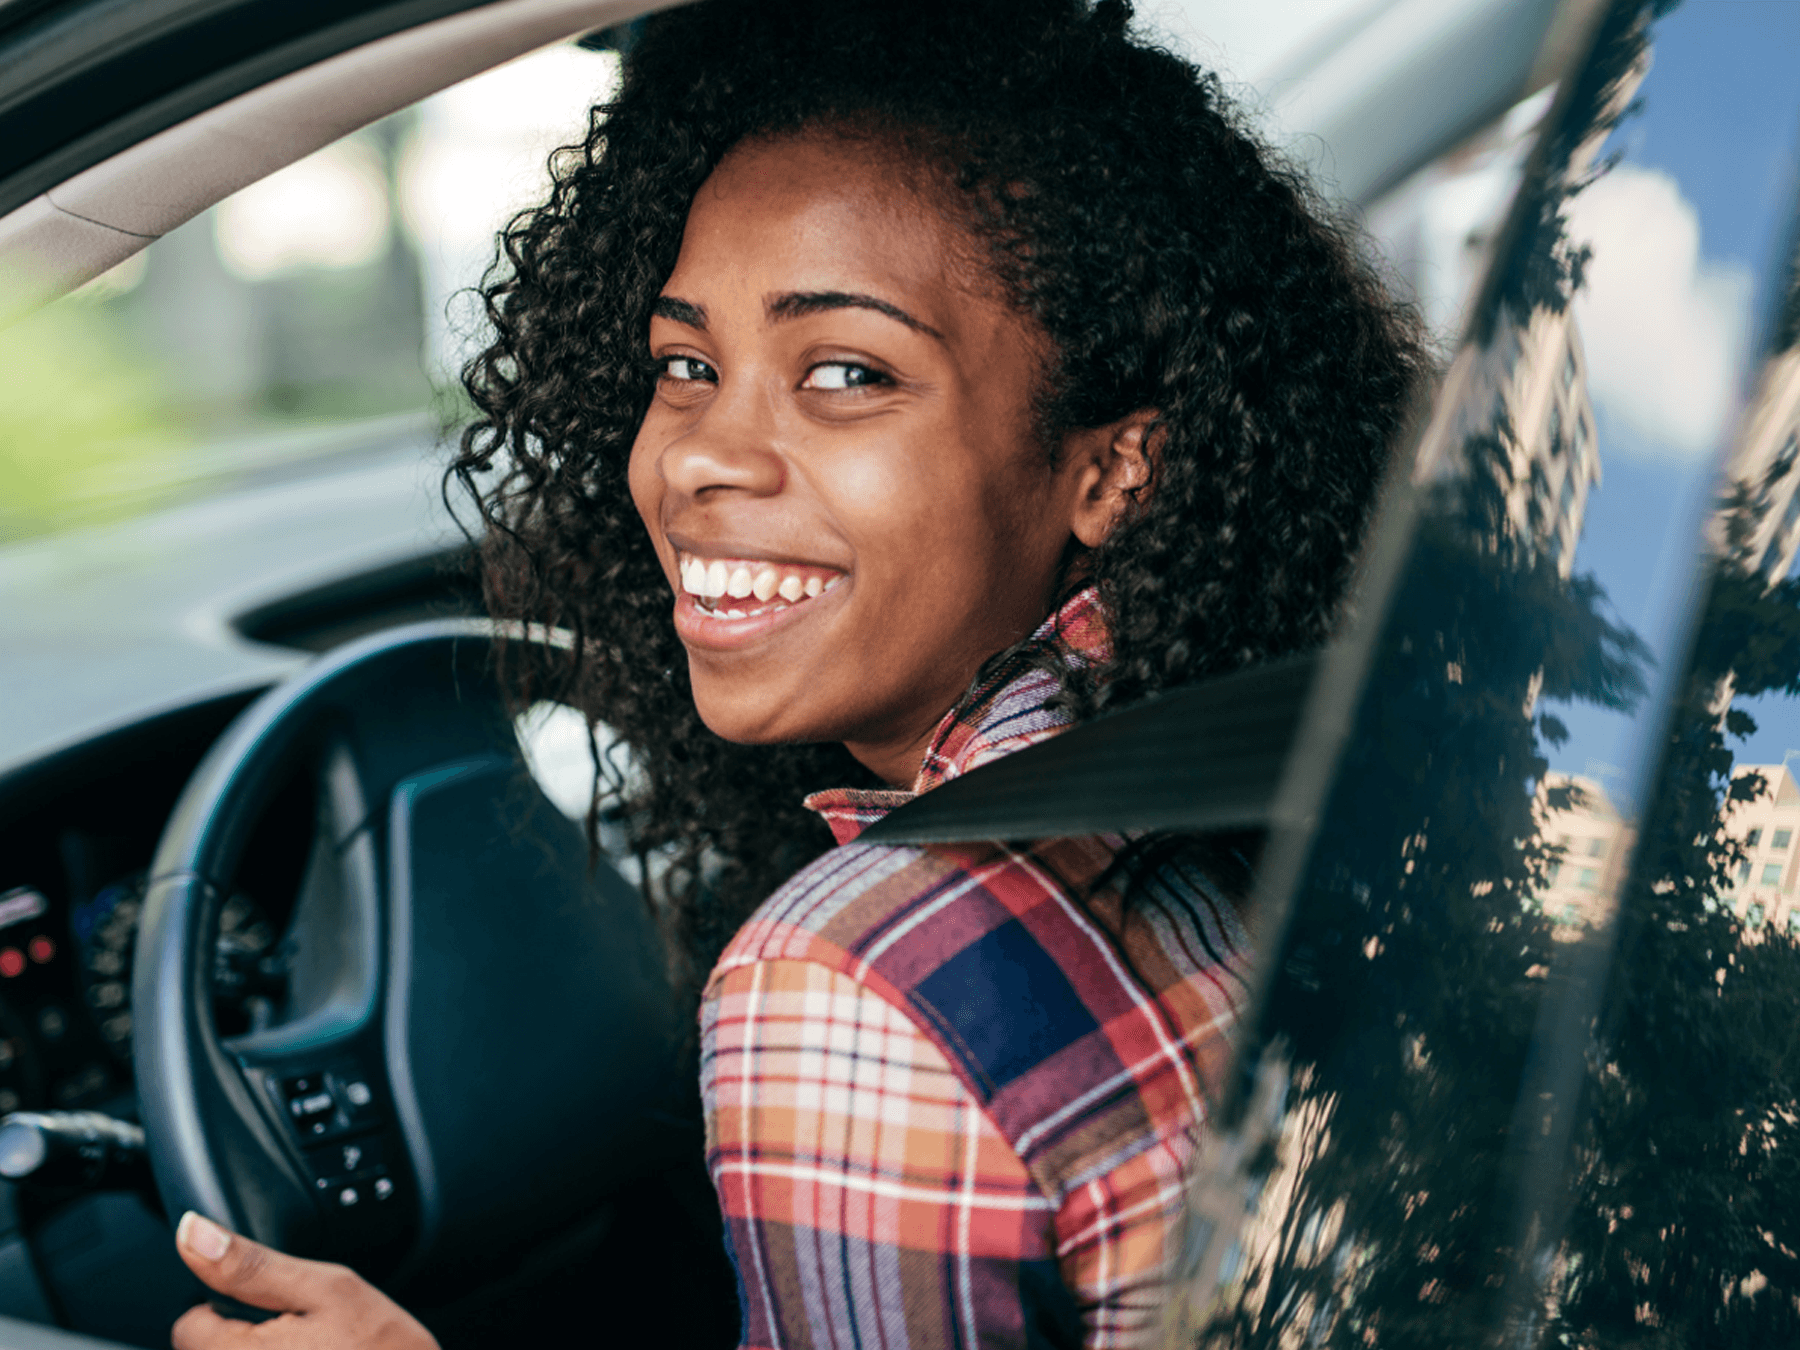 The Research Foundation offers free, life-saving class to young drivers